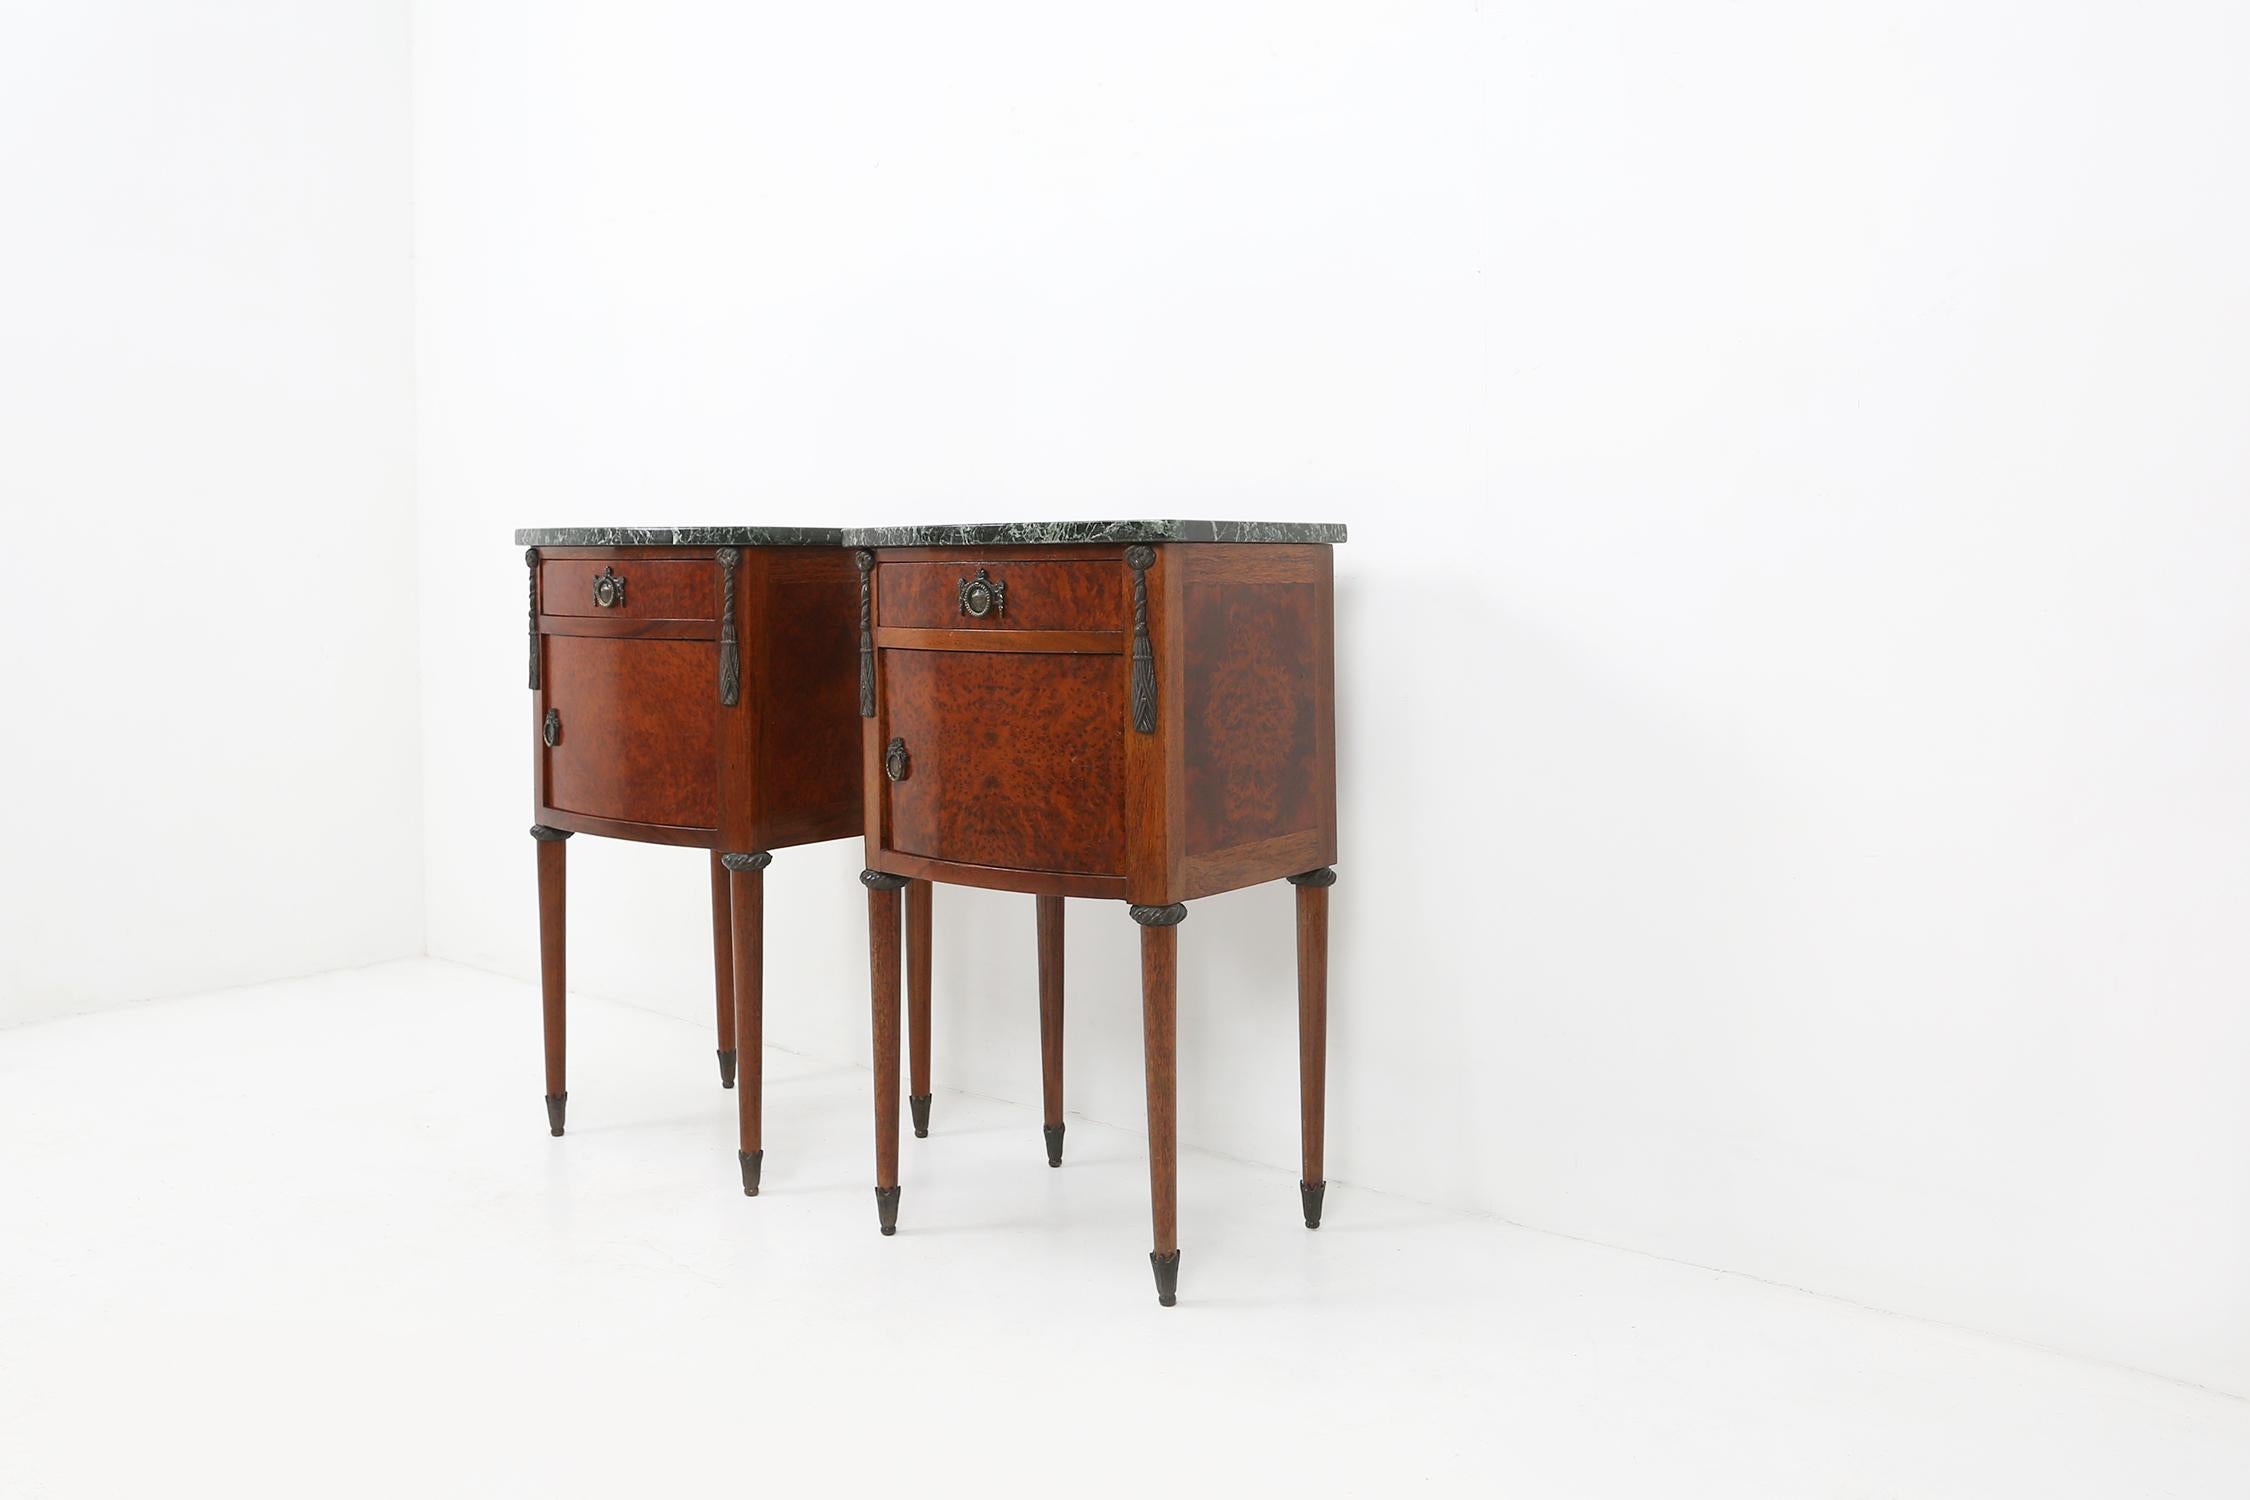 Empire style nightstands made around 1950. Made of some high value materials as burl wood, marble and brass.